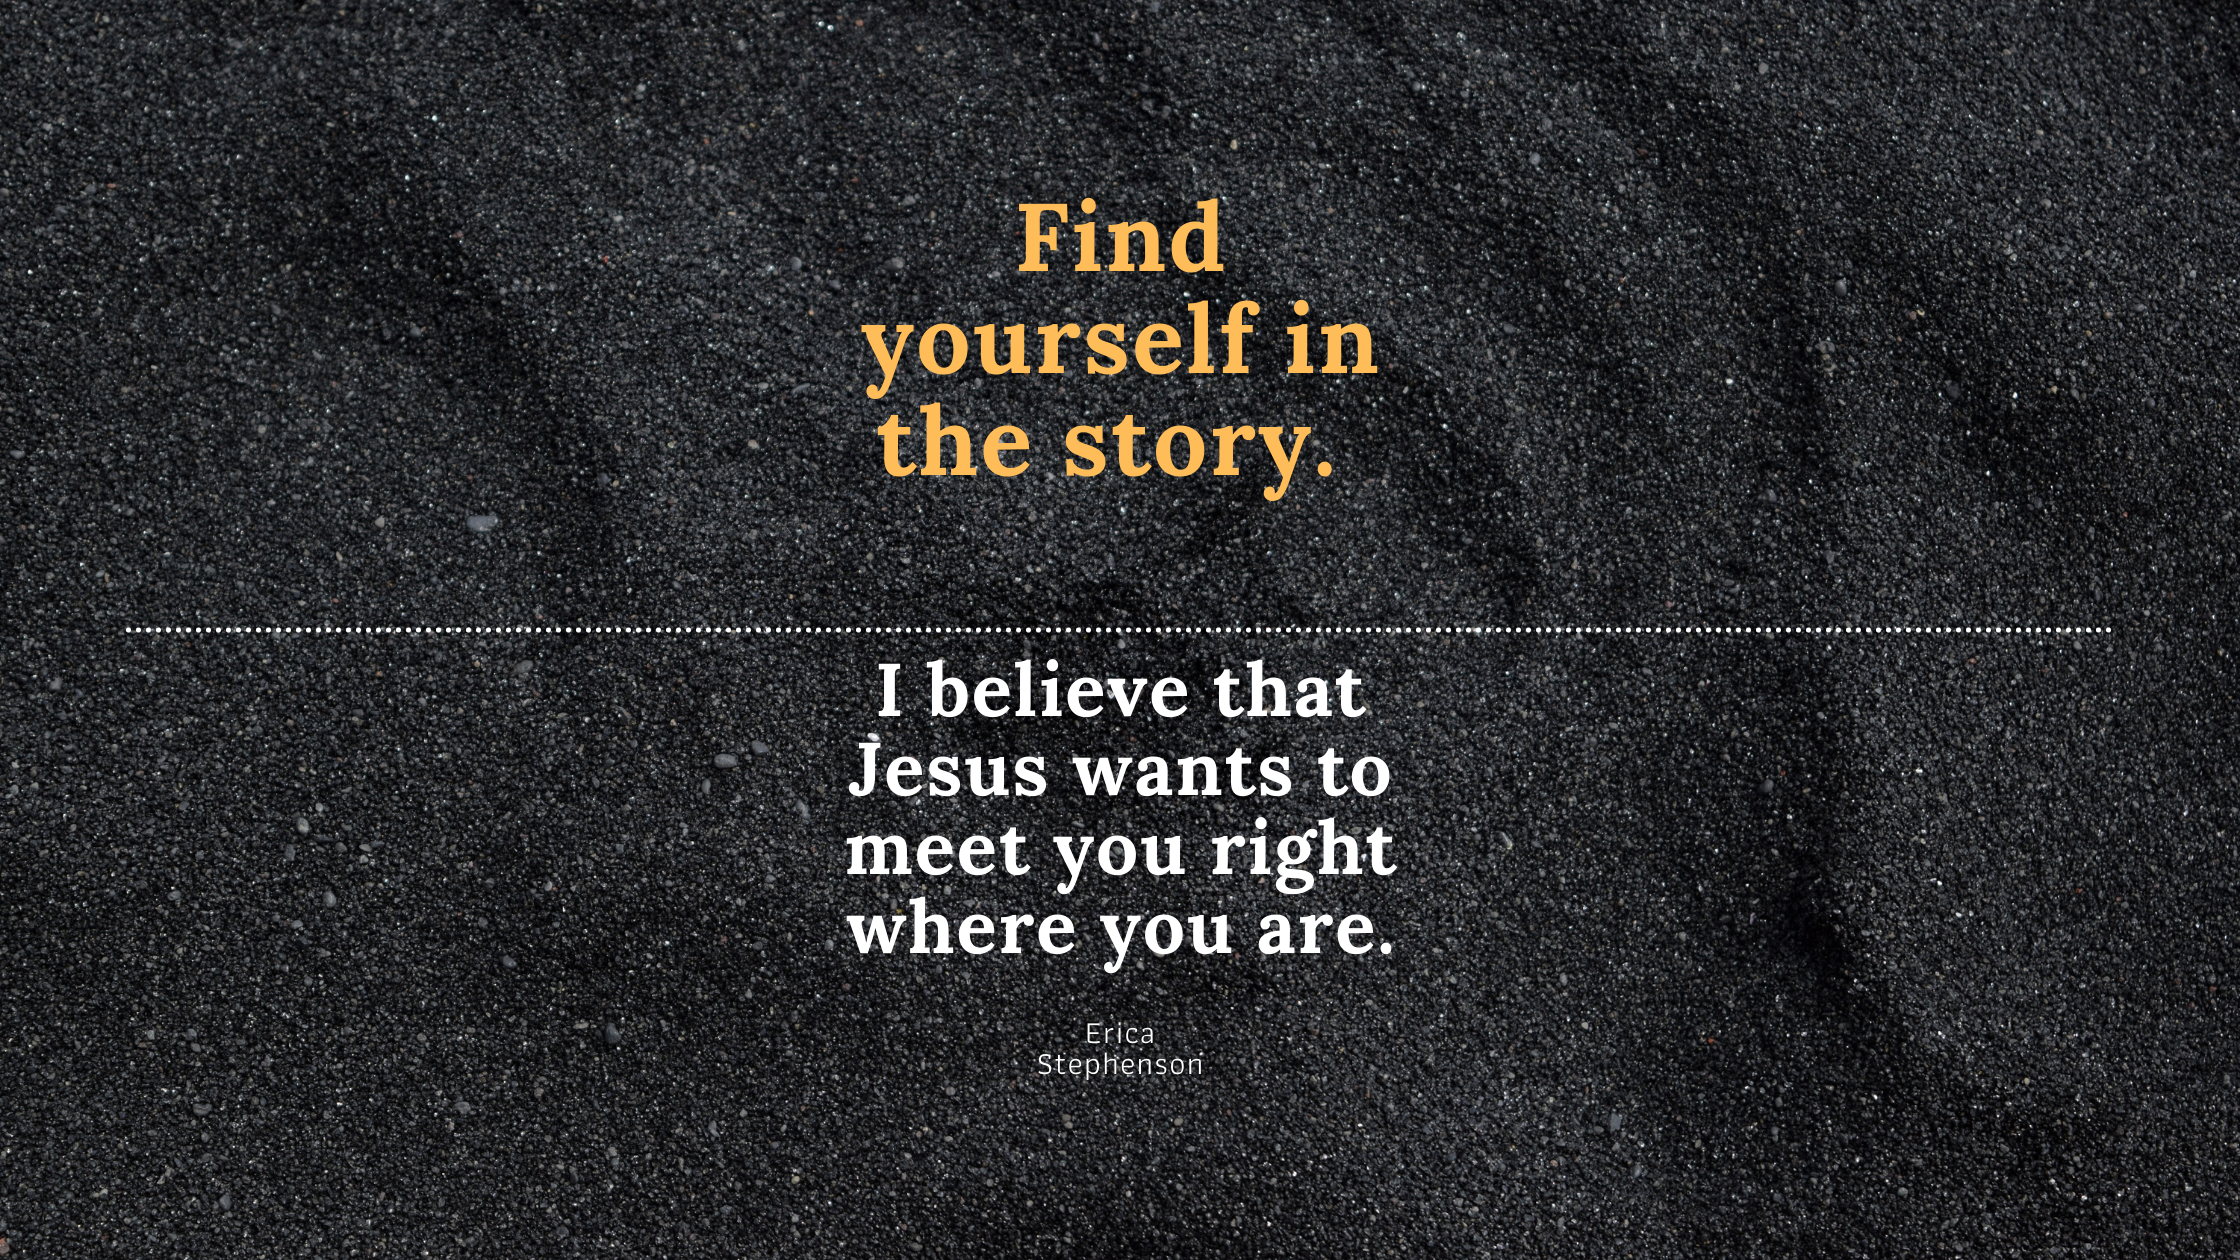 Find yourself in the story. I believe that Jesus wants to meet you right where you are.